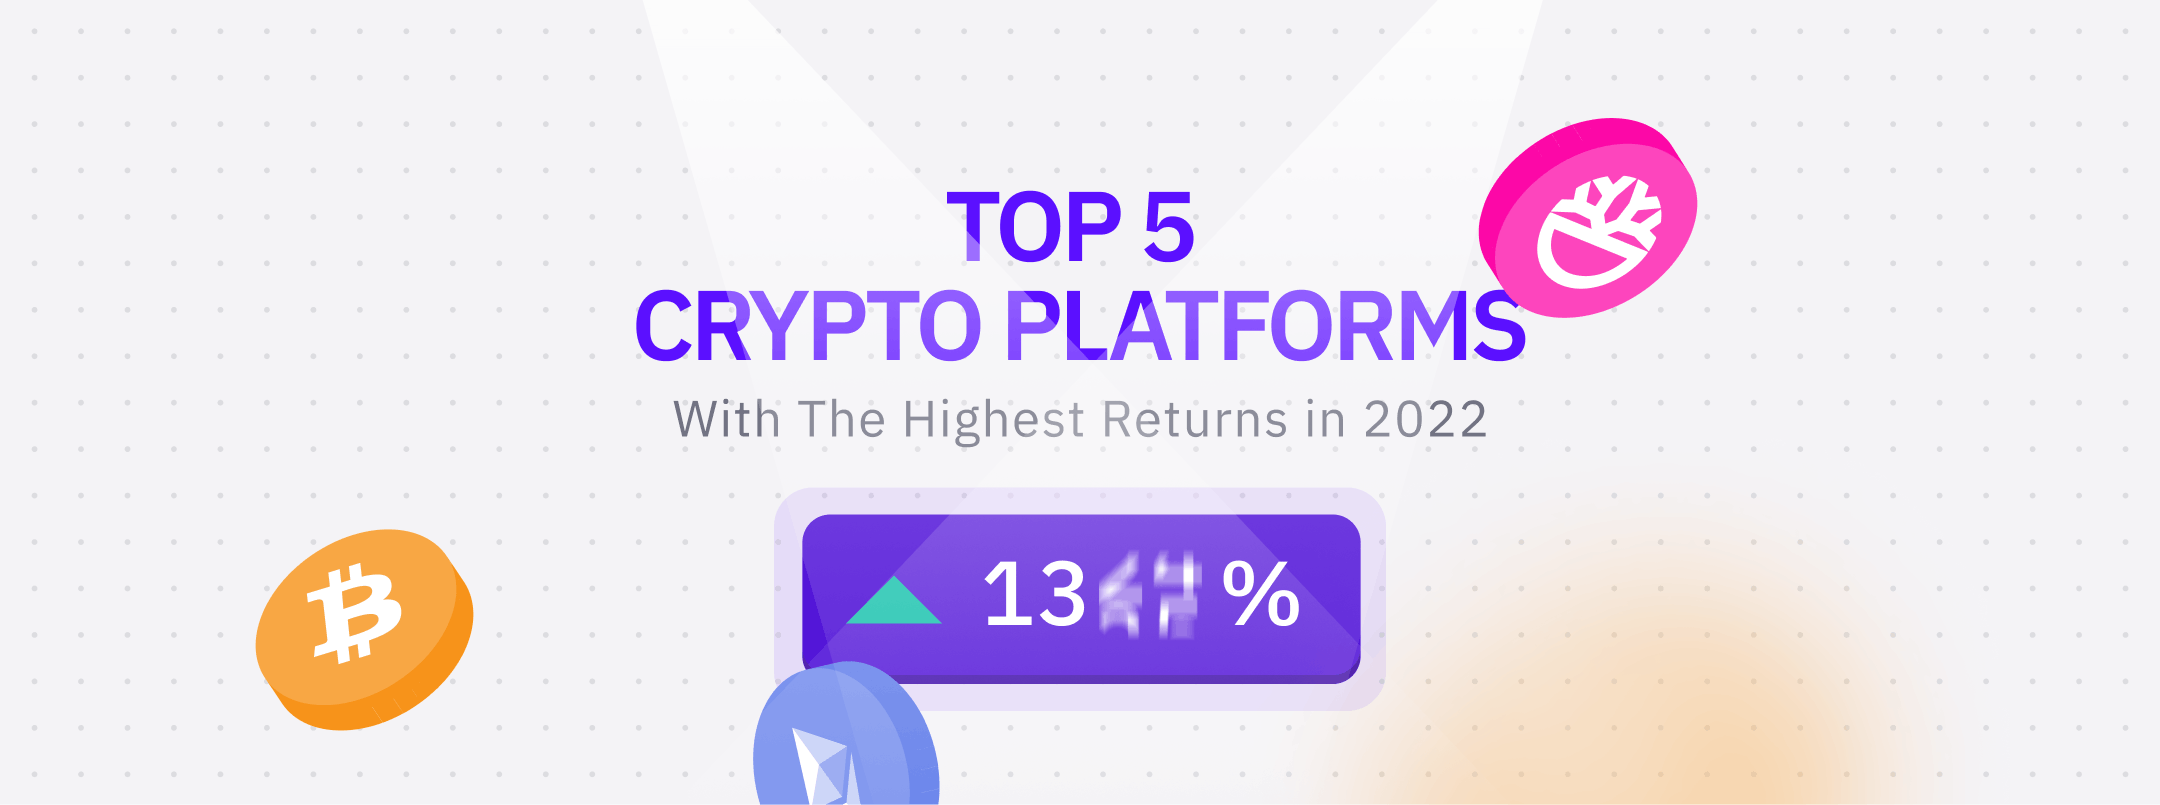 Top 5 Crypto Platforms With The Highest Returns in 2022